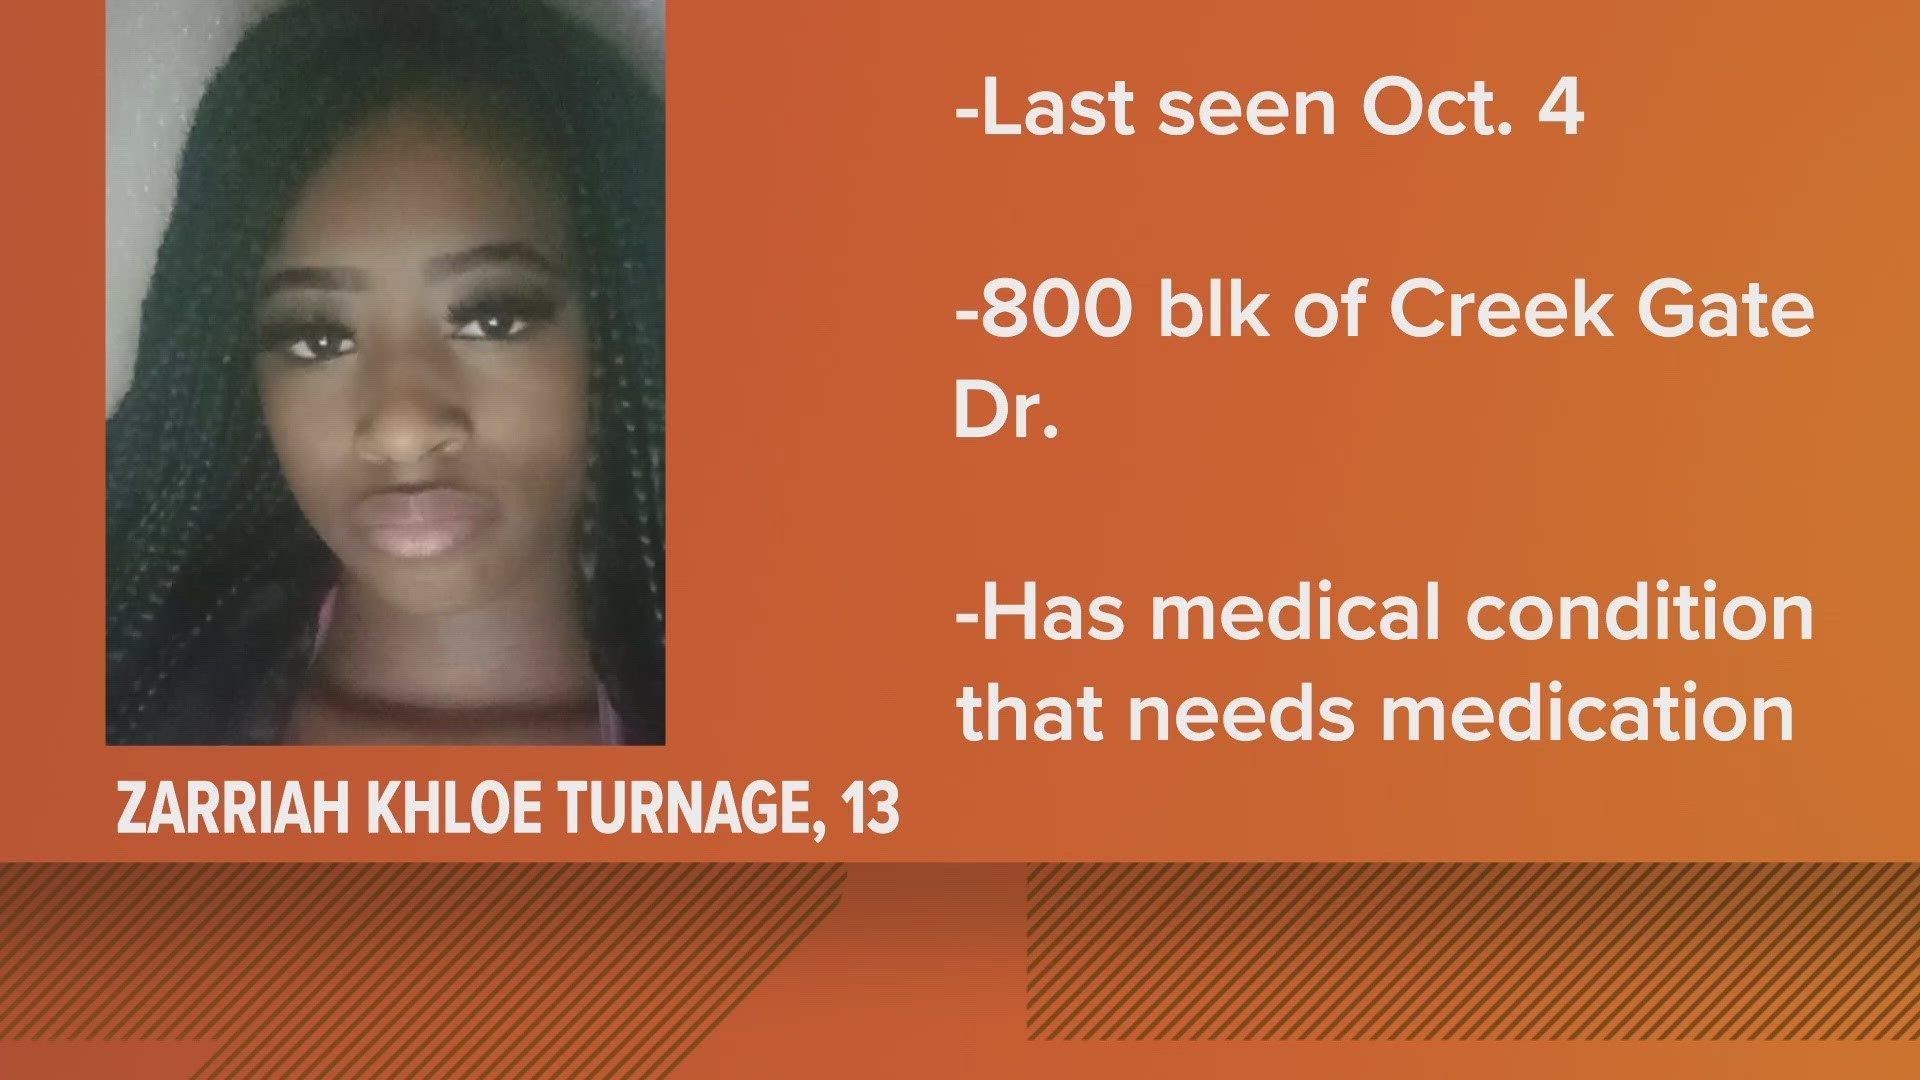 Zarriah Khloe Turnage, 13​, was last seen wearing a gray t-shirt, black pajama pants, and grey and white Jordans.